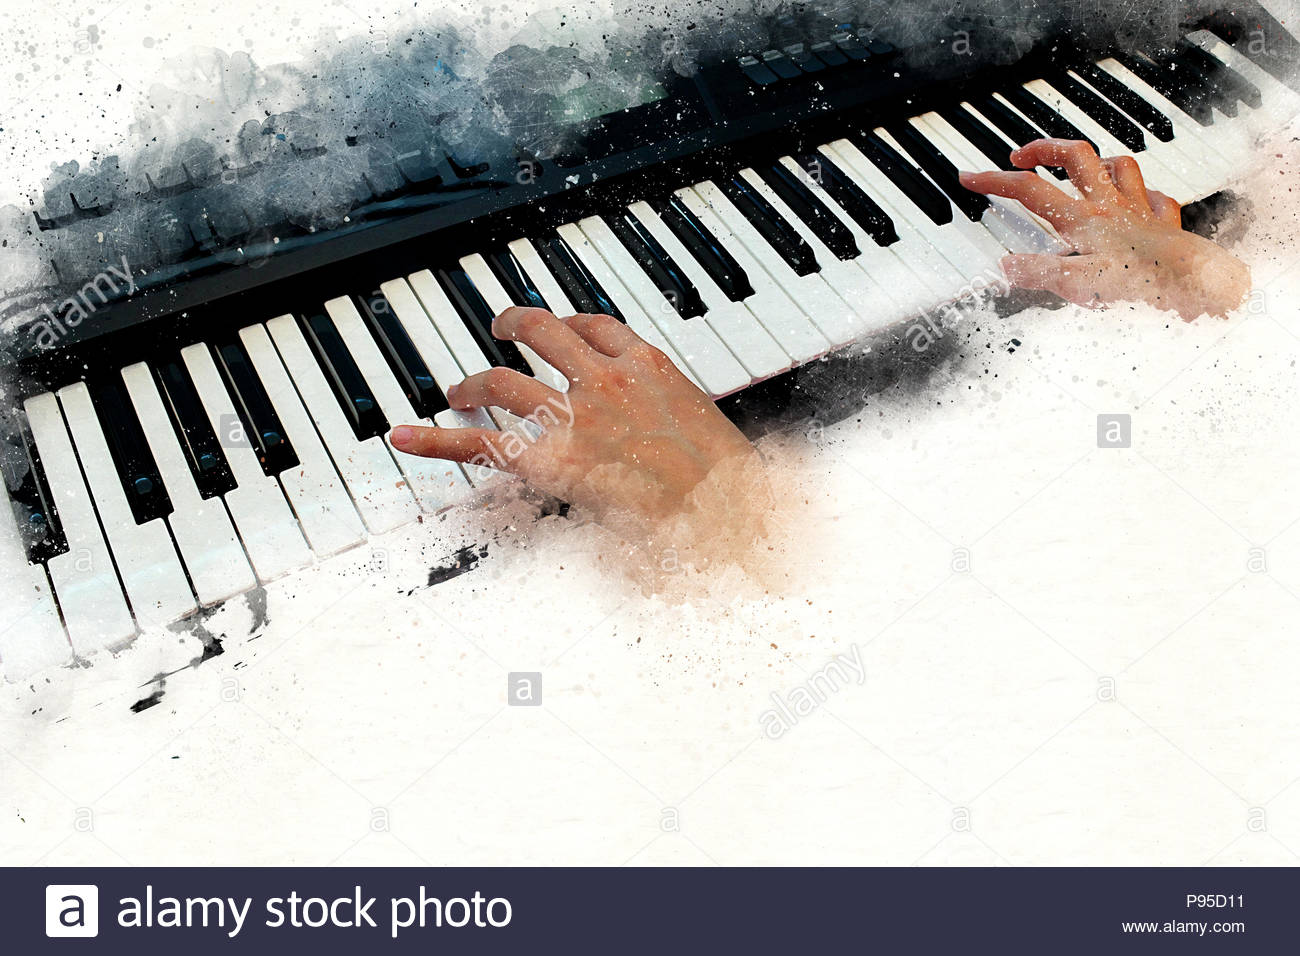 Abstract Beautiful Hand Playing Keyboard Of The Piano Foreground